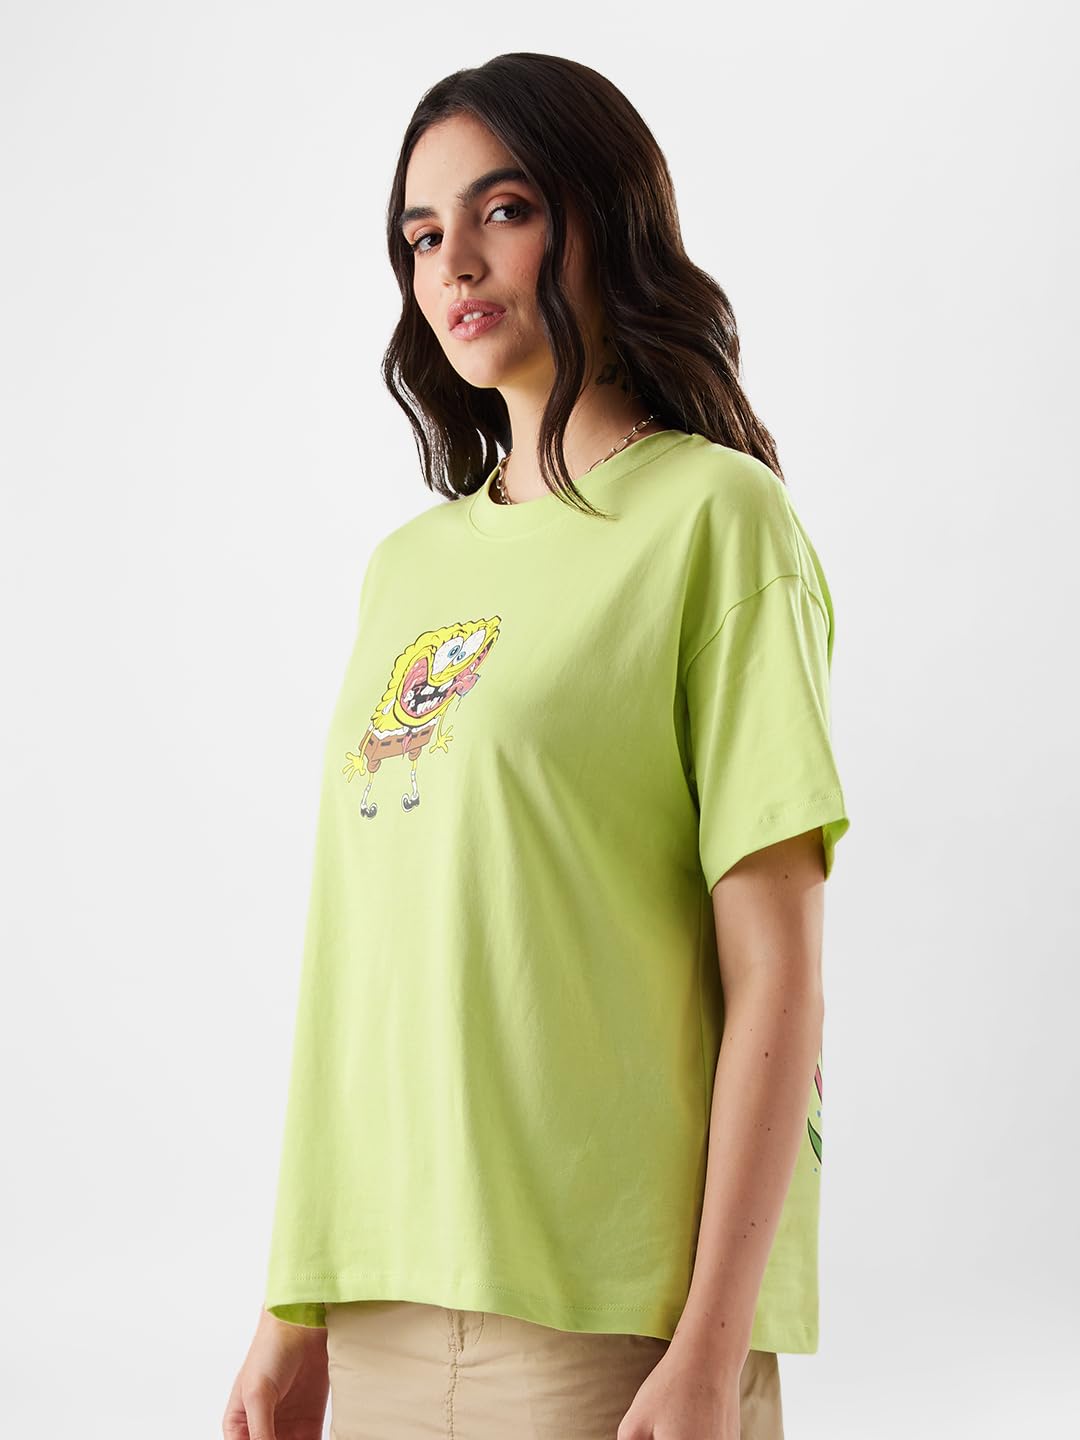 The Souled Store Official Spongebob: Oh Buoy Women and Girls Oversize Fit Half Sleeve Graphic Printed Cotton Yellow Color T-Shirt